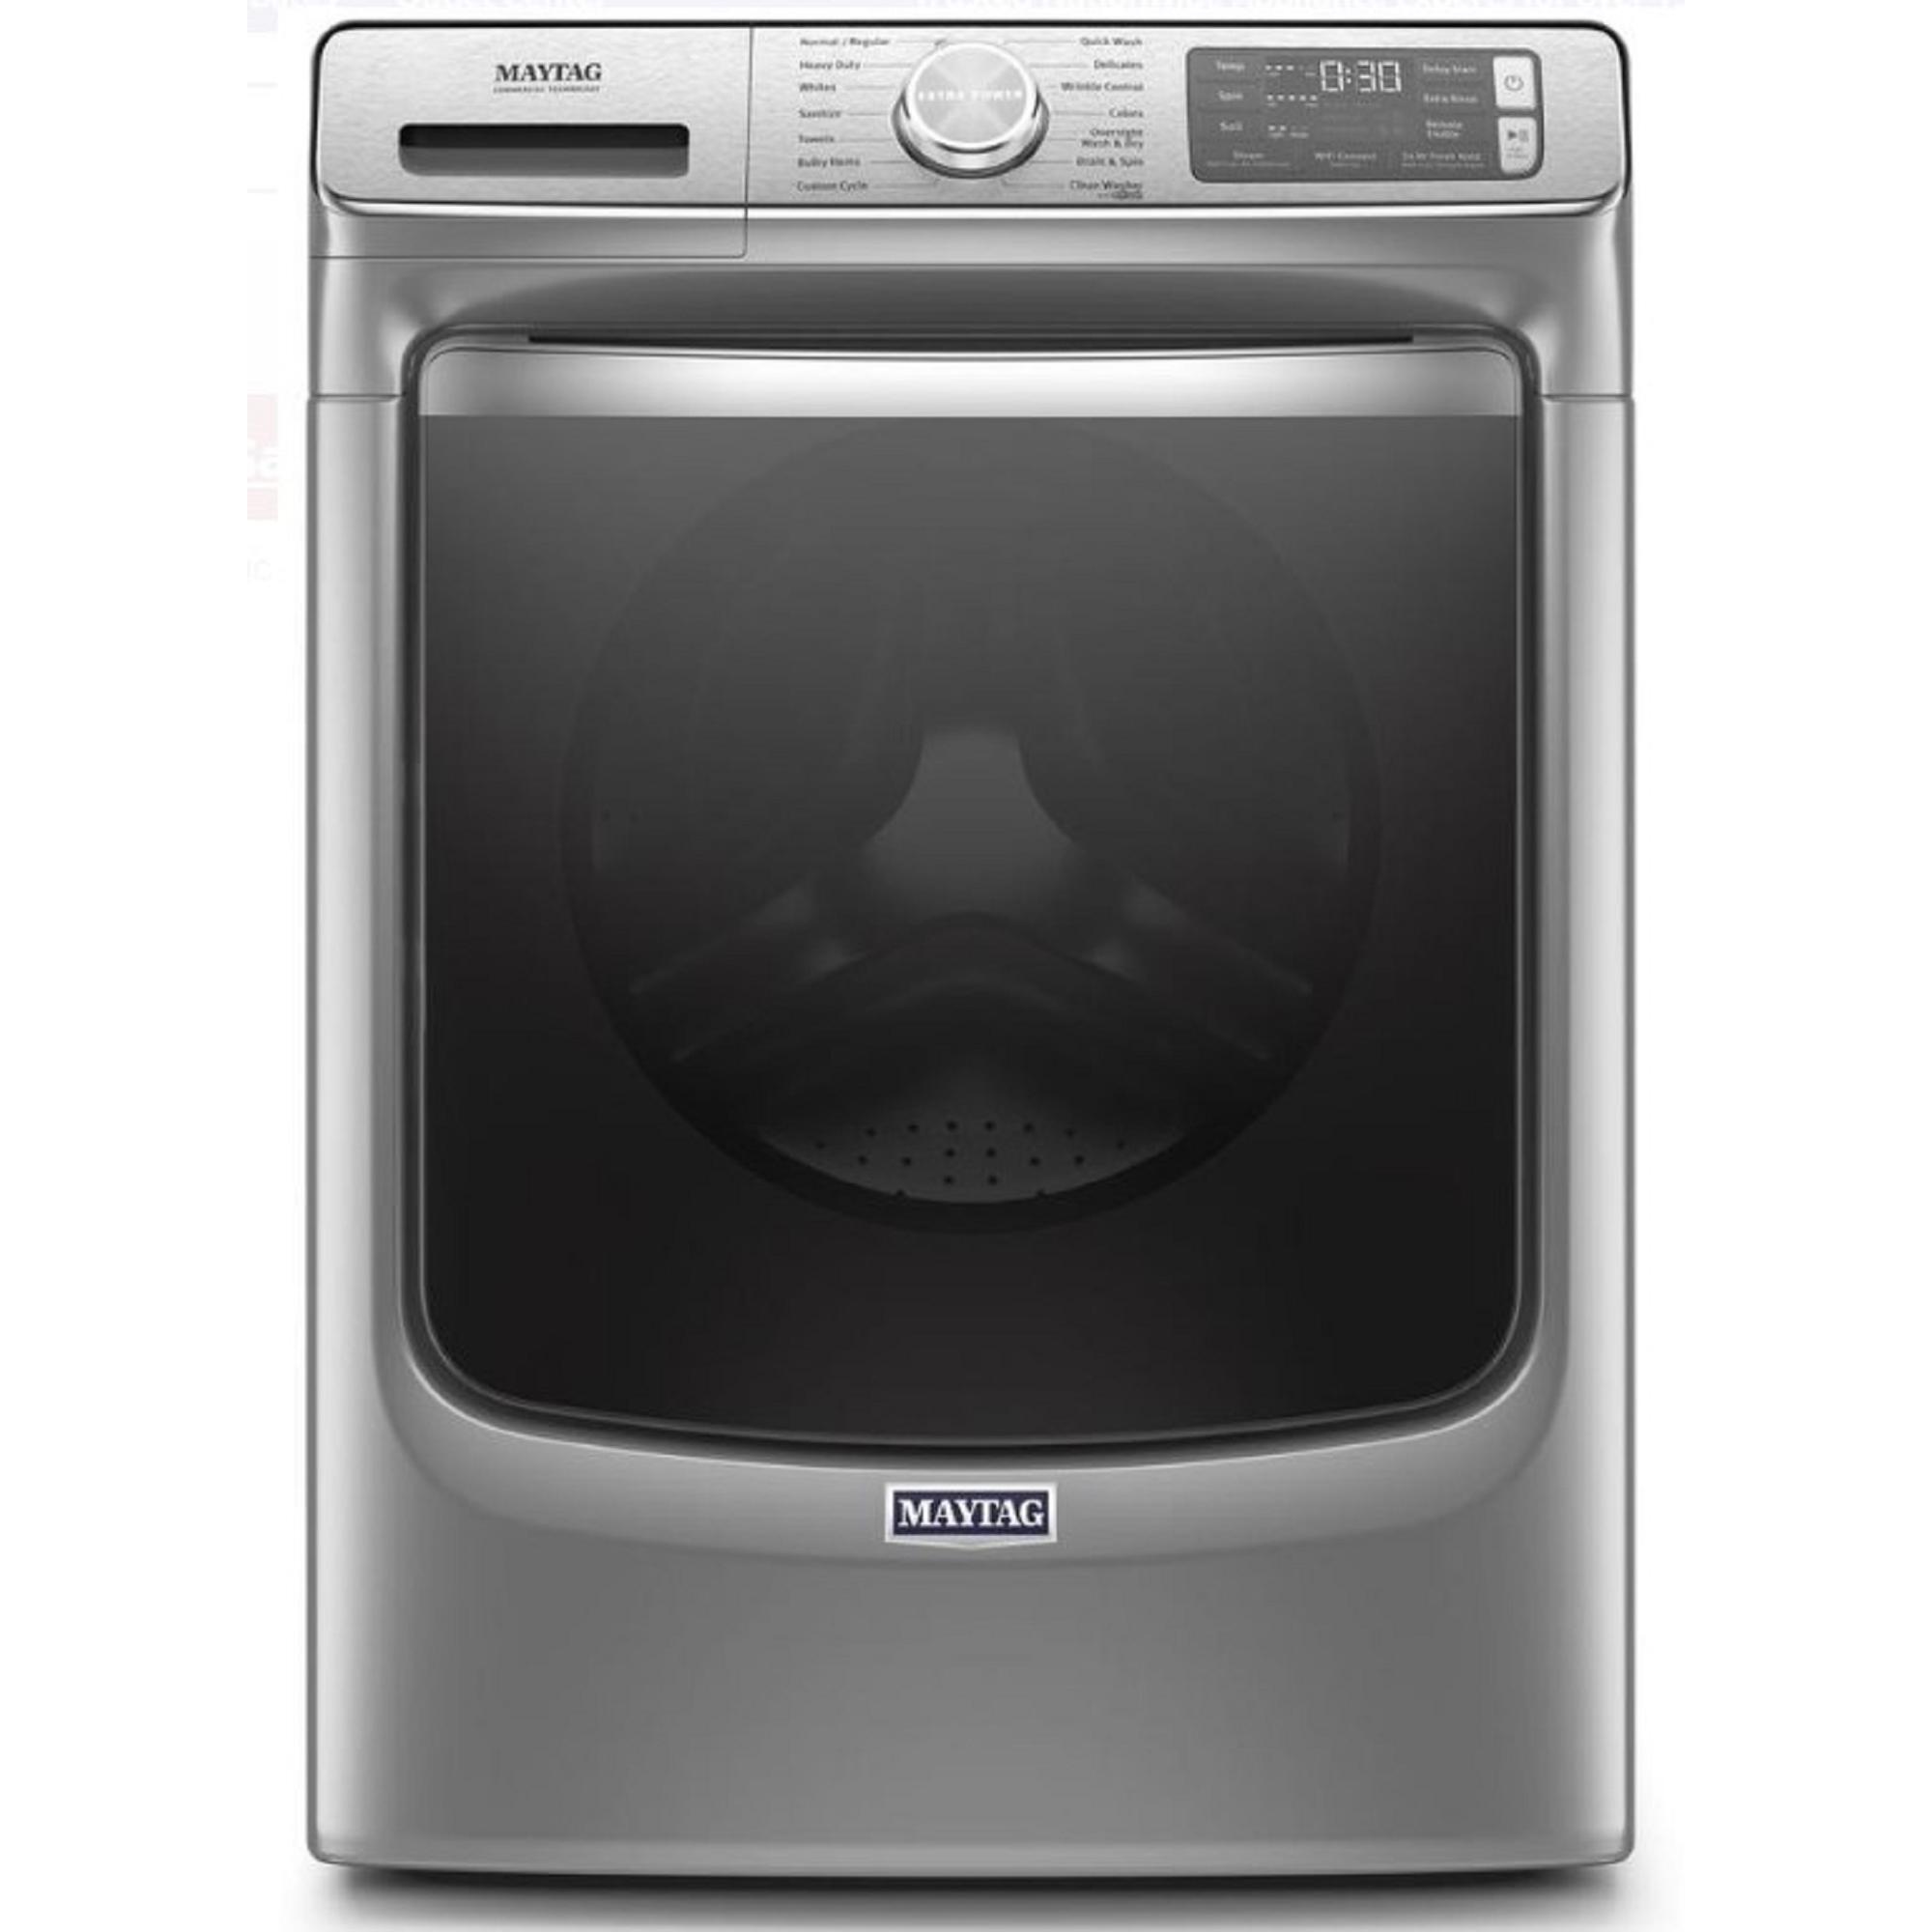 Maytag MHW8630HC 5 Cu. Ft. 27" Front Load Washer in Metallic Slate